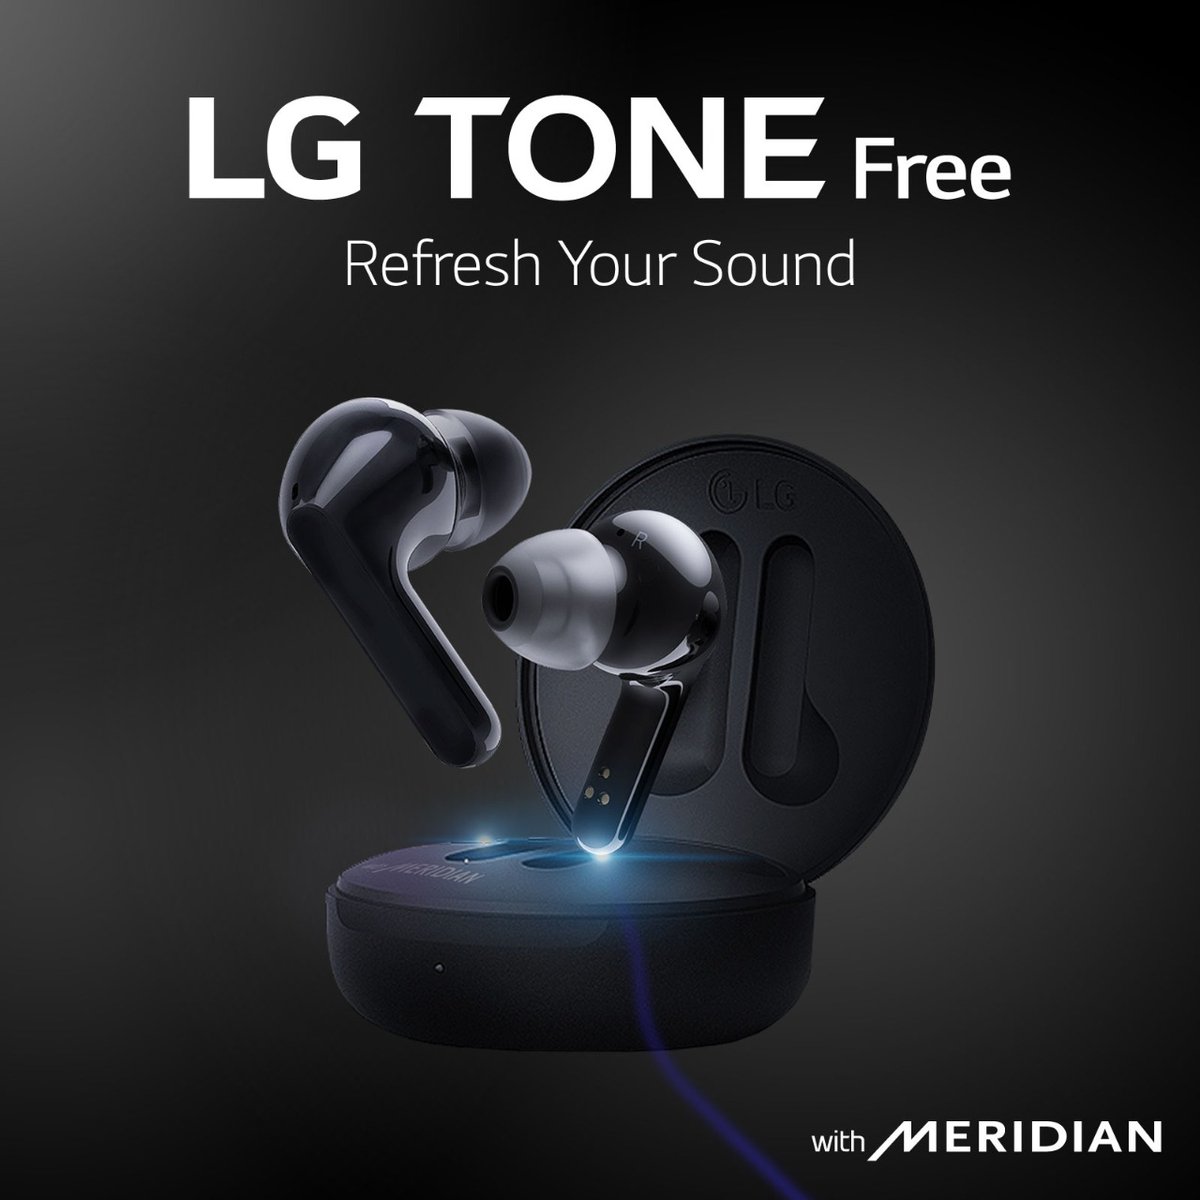 Get yourself the LG Tone Free earbuds  to enjoy amazing features which include great sound, comfort and personalized settings to give you a more wholesome and immersive sound experience. Learn more by visiting bit.ly/2QJs2V4
#LGToneFree
#LG100Club